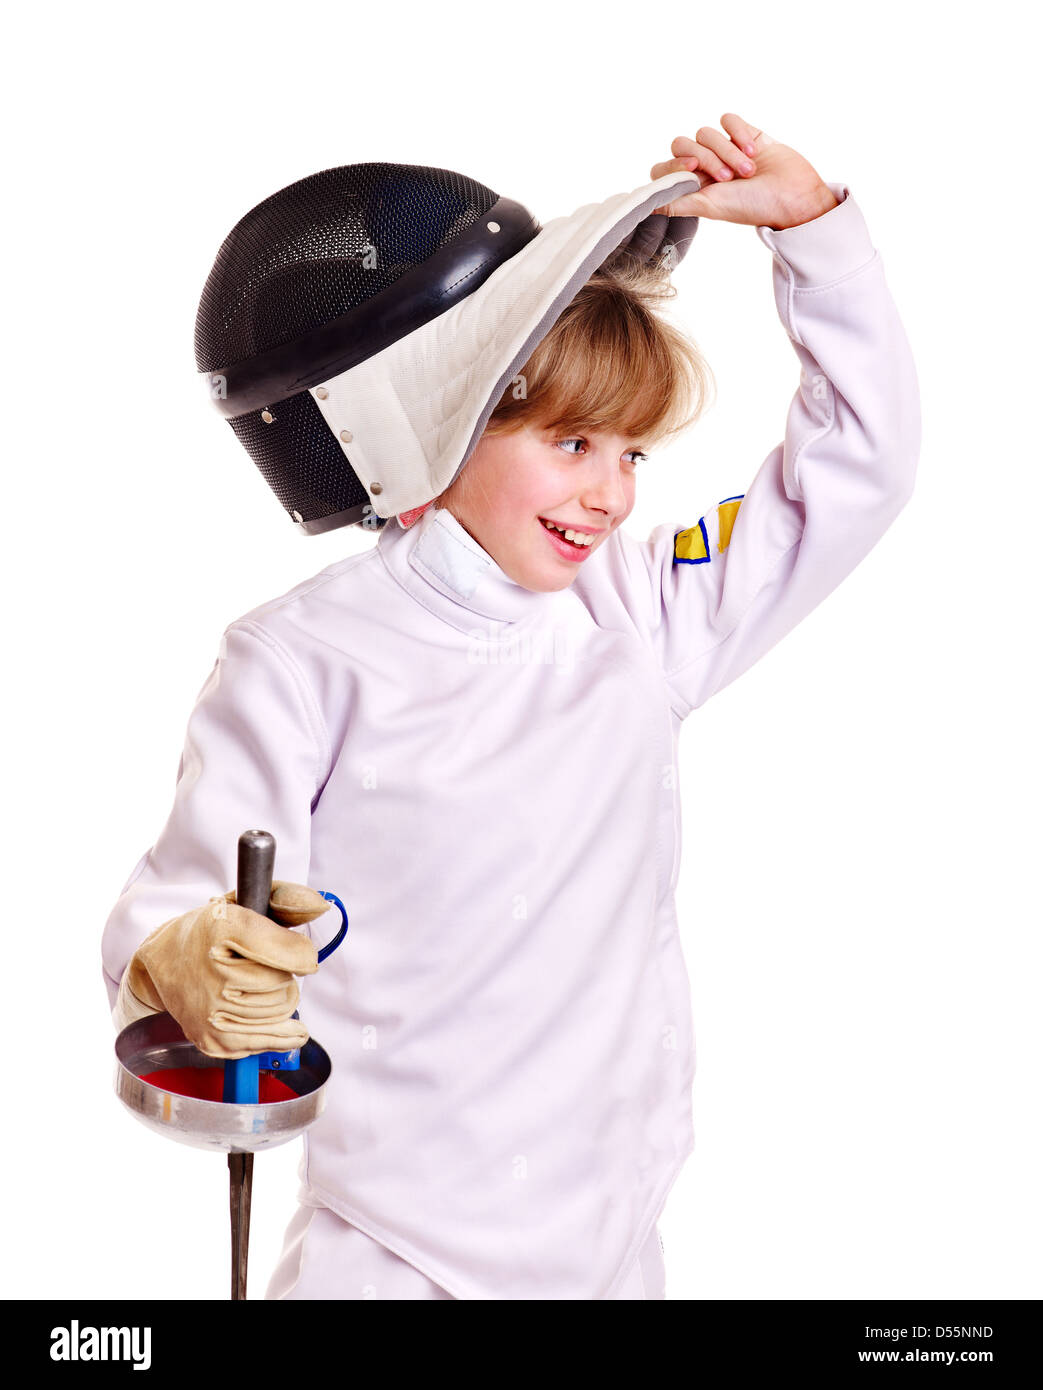 Child in fencing costume holding epee . Stock Photo